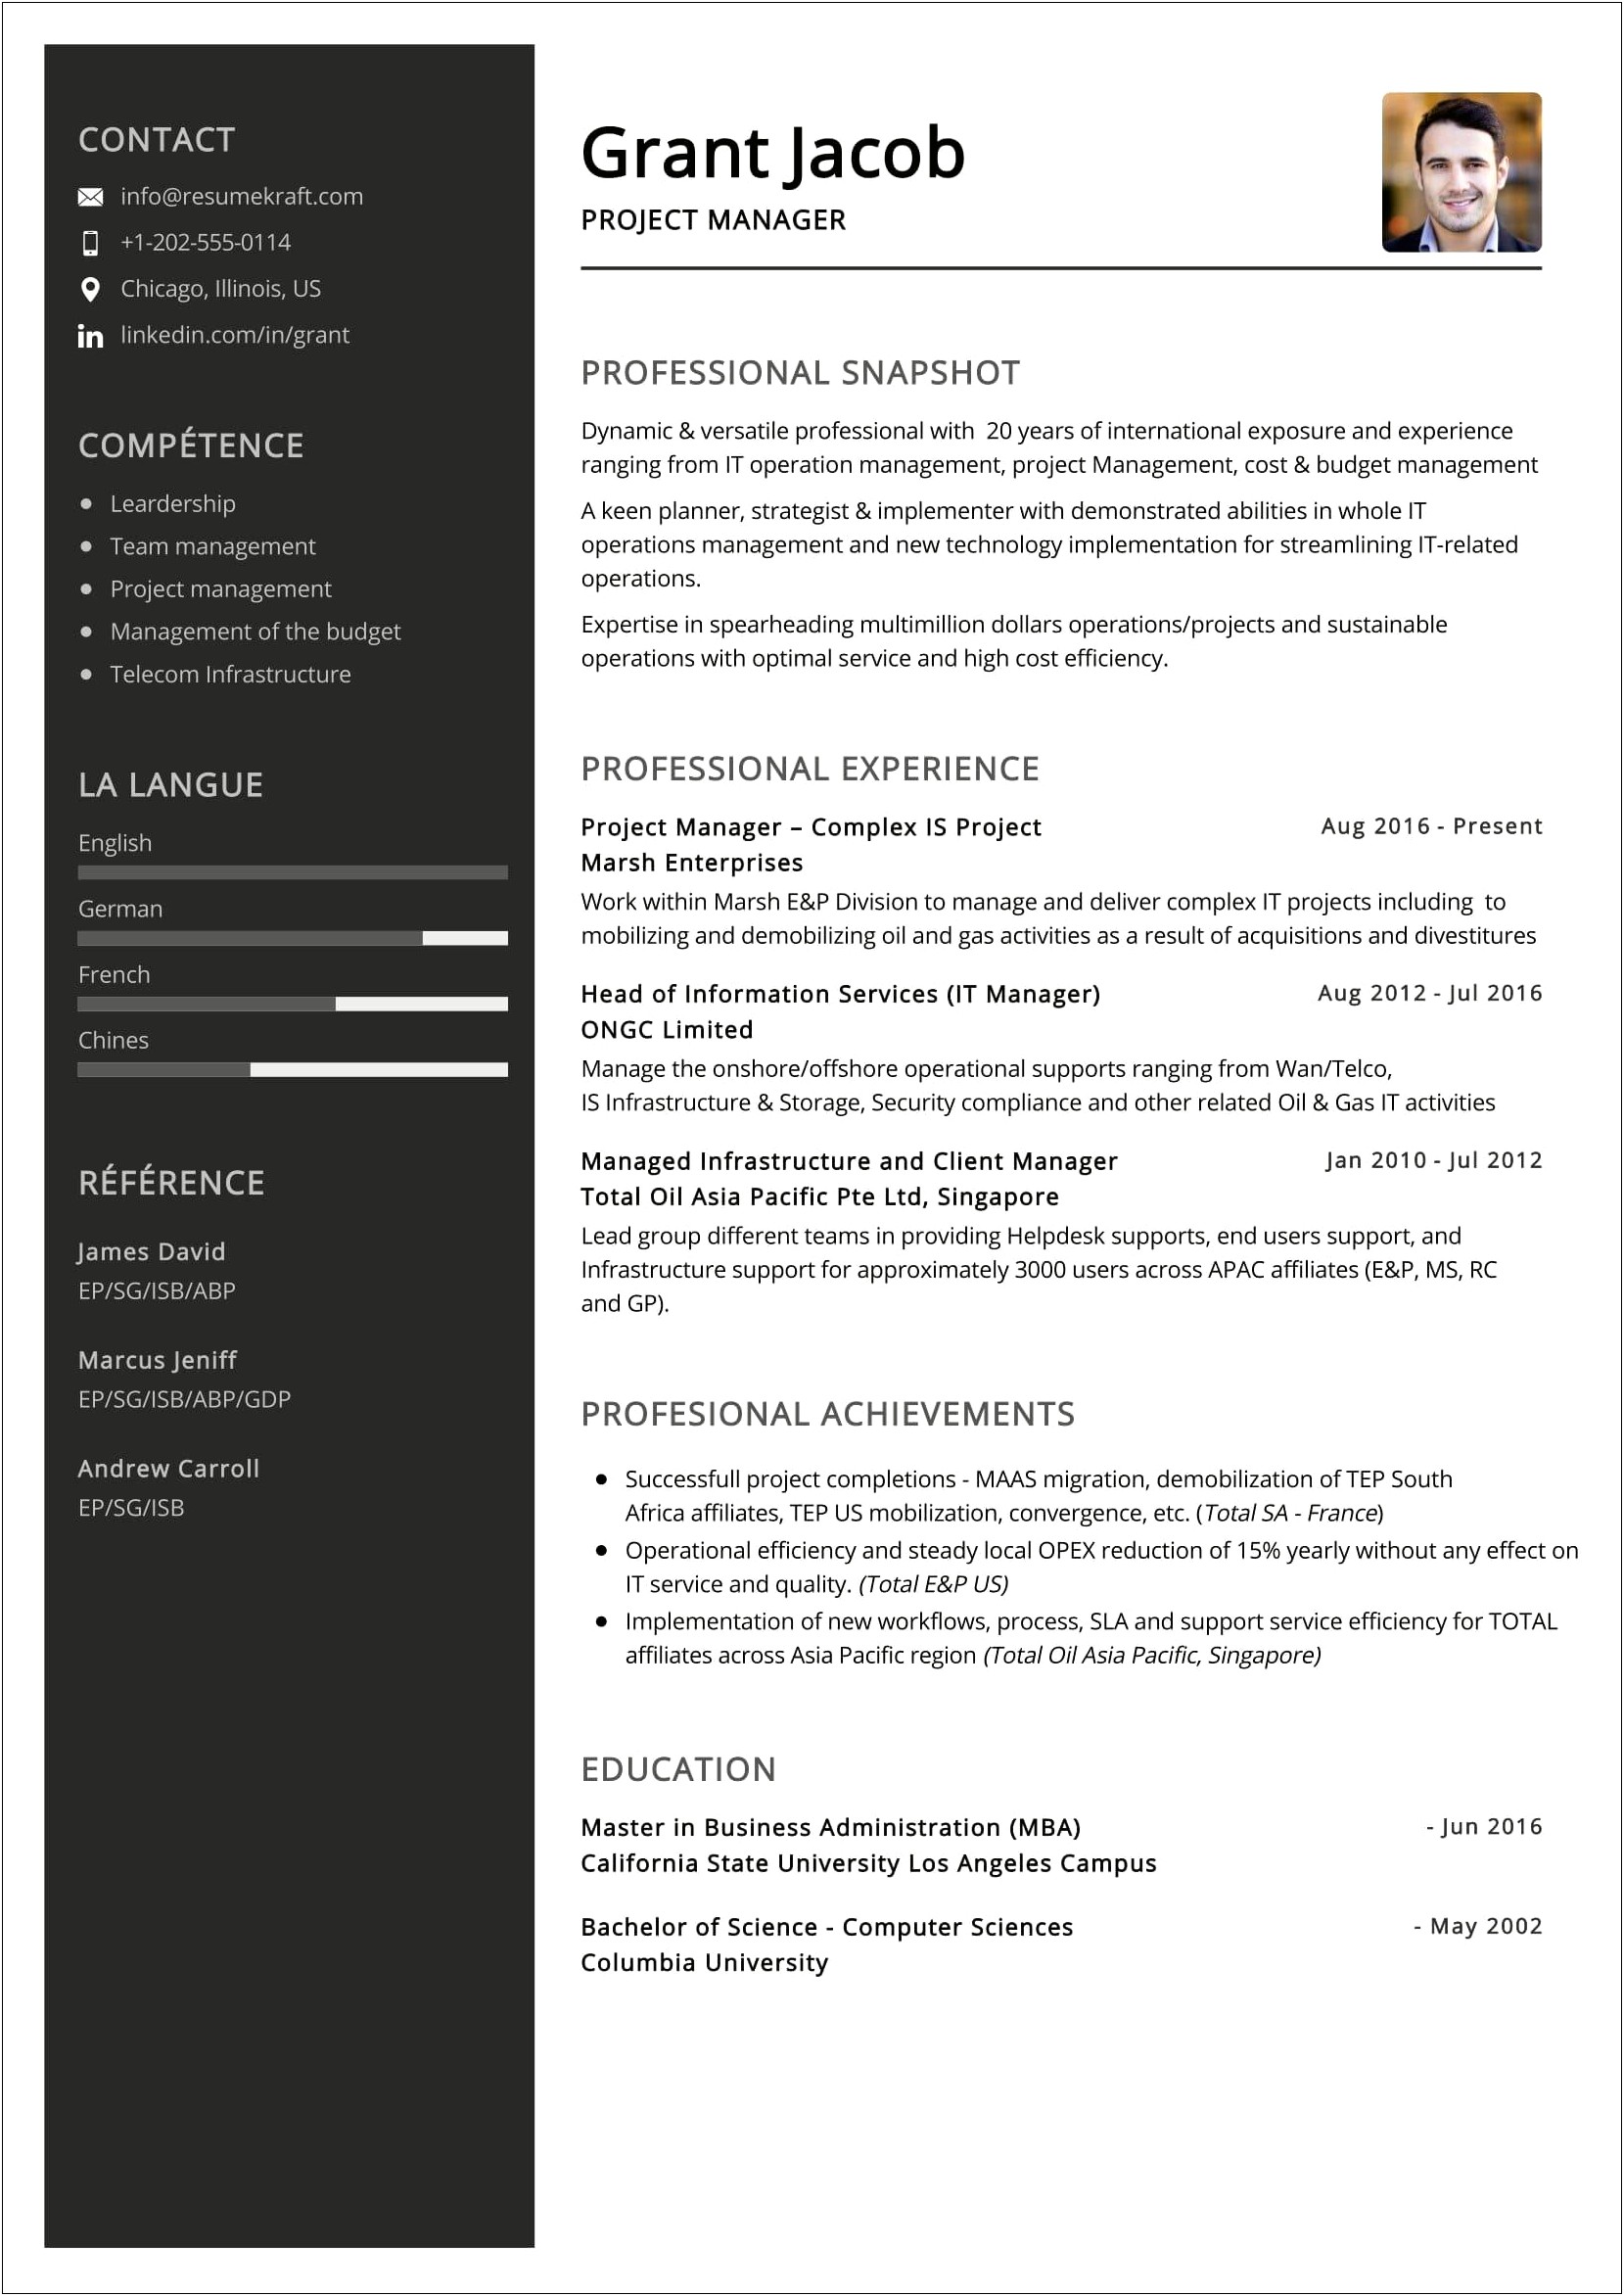 Resume For Manager Of Advanced Technology